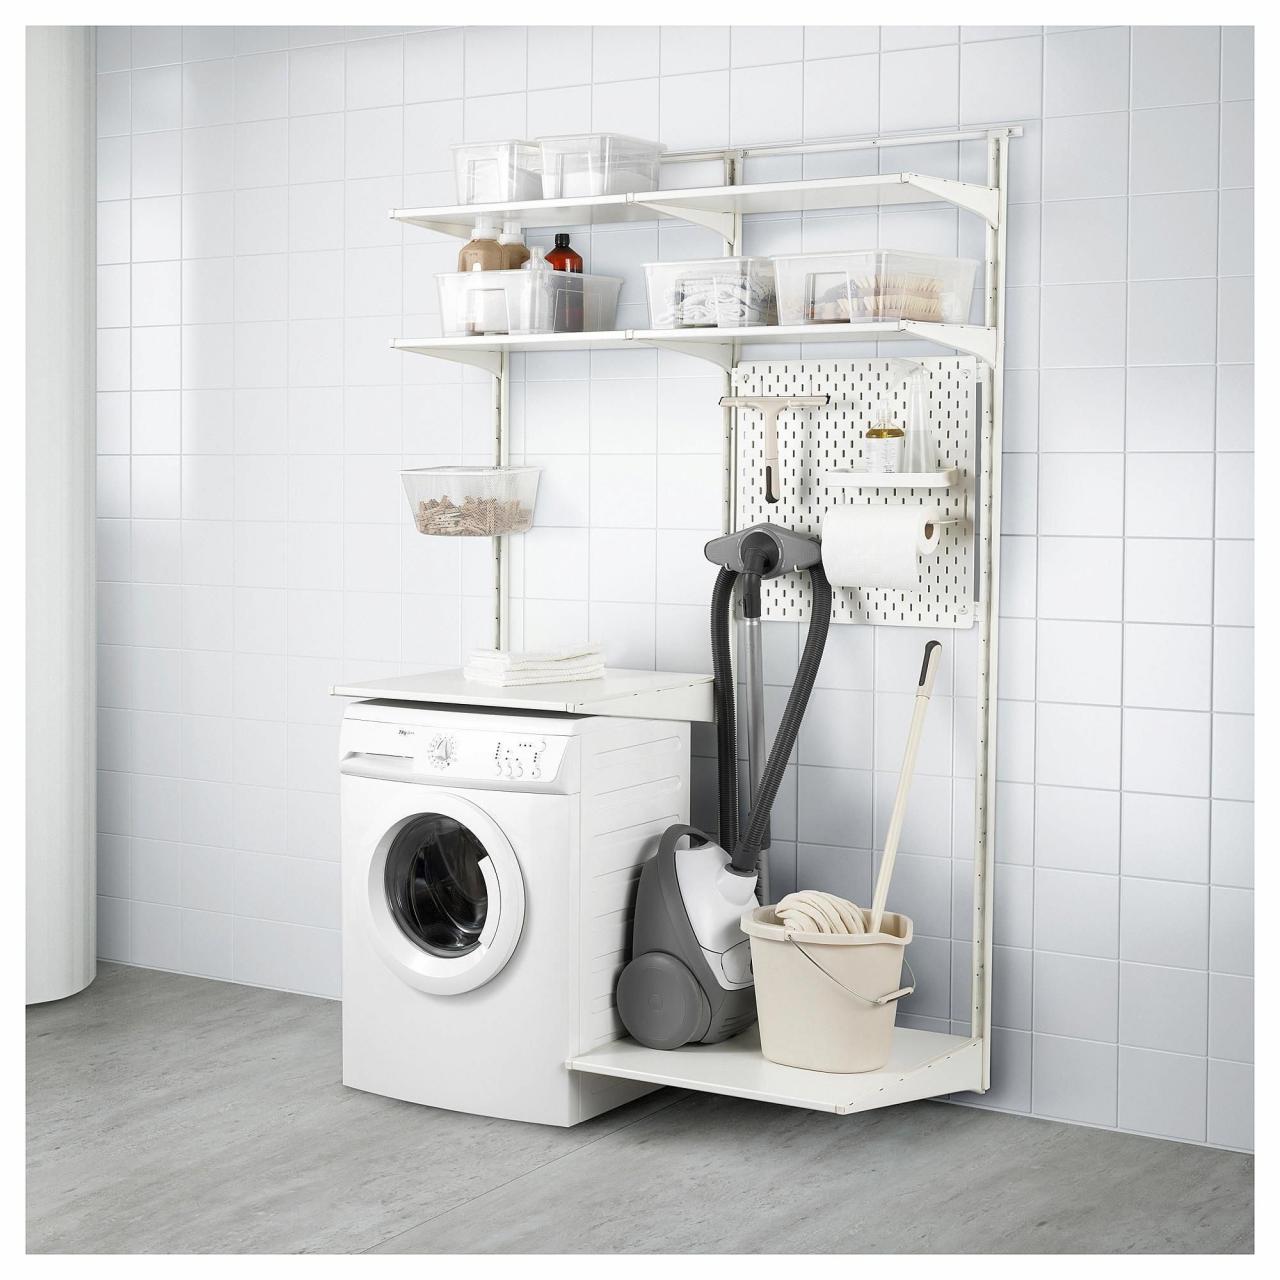 List Of Laundry Room Shelving Ikea With DIY Home decorating Ideas